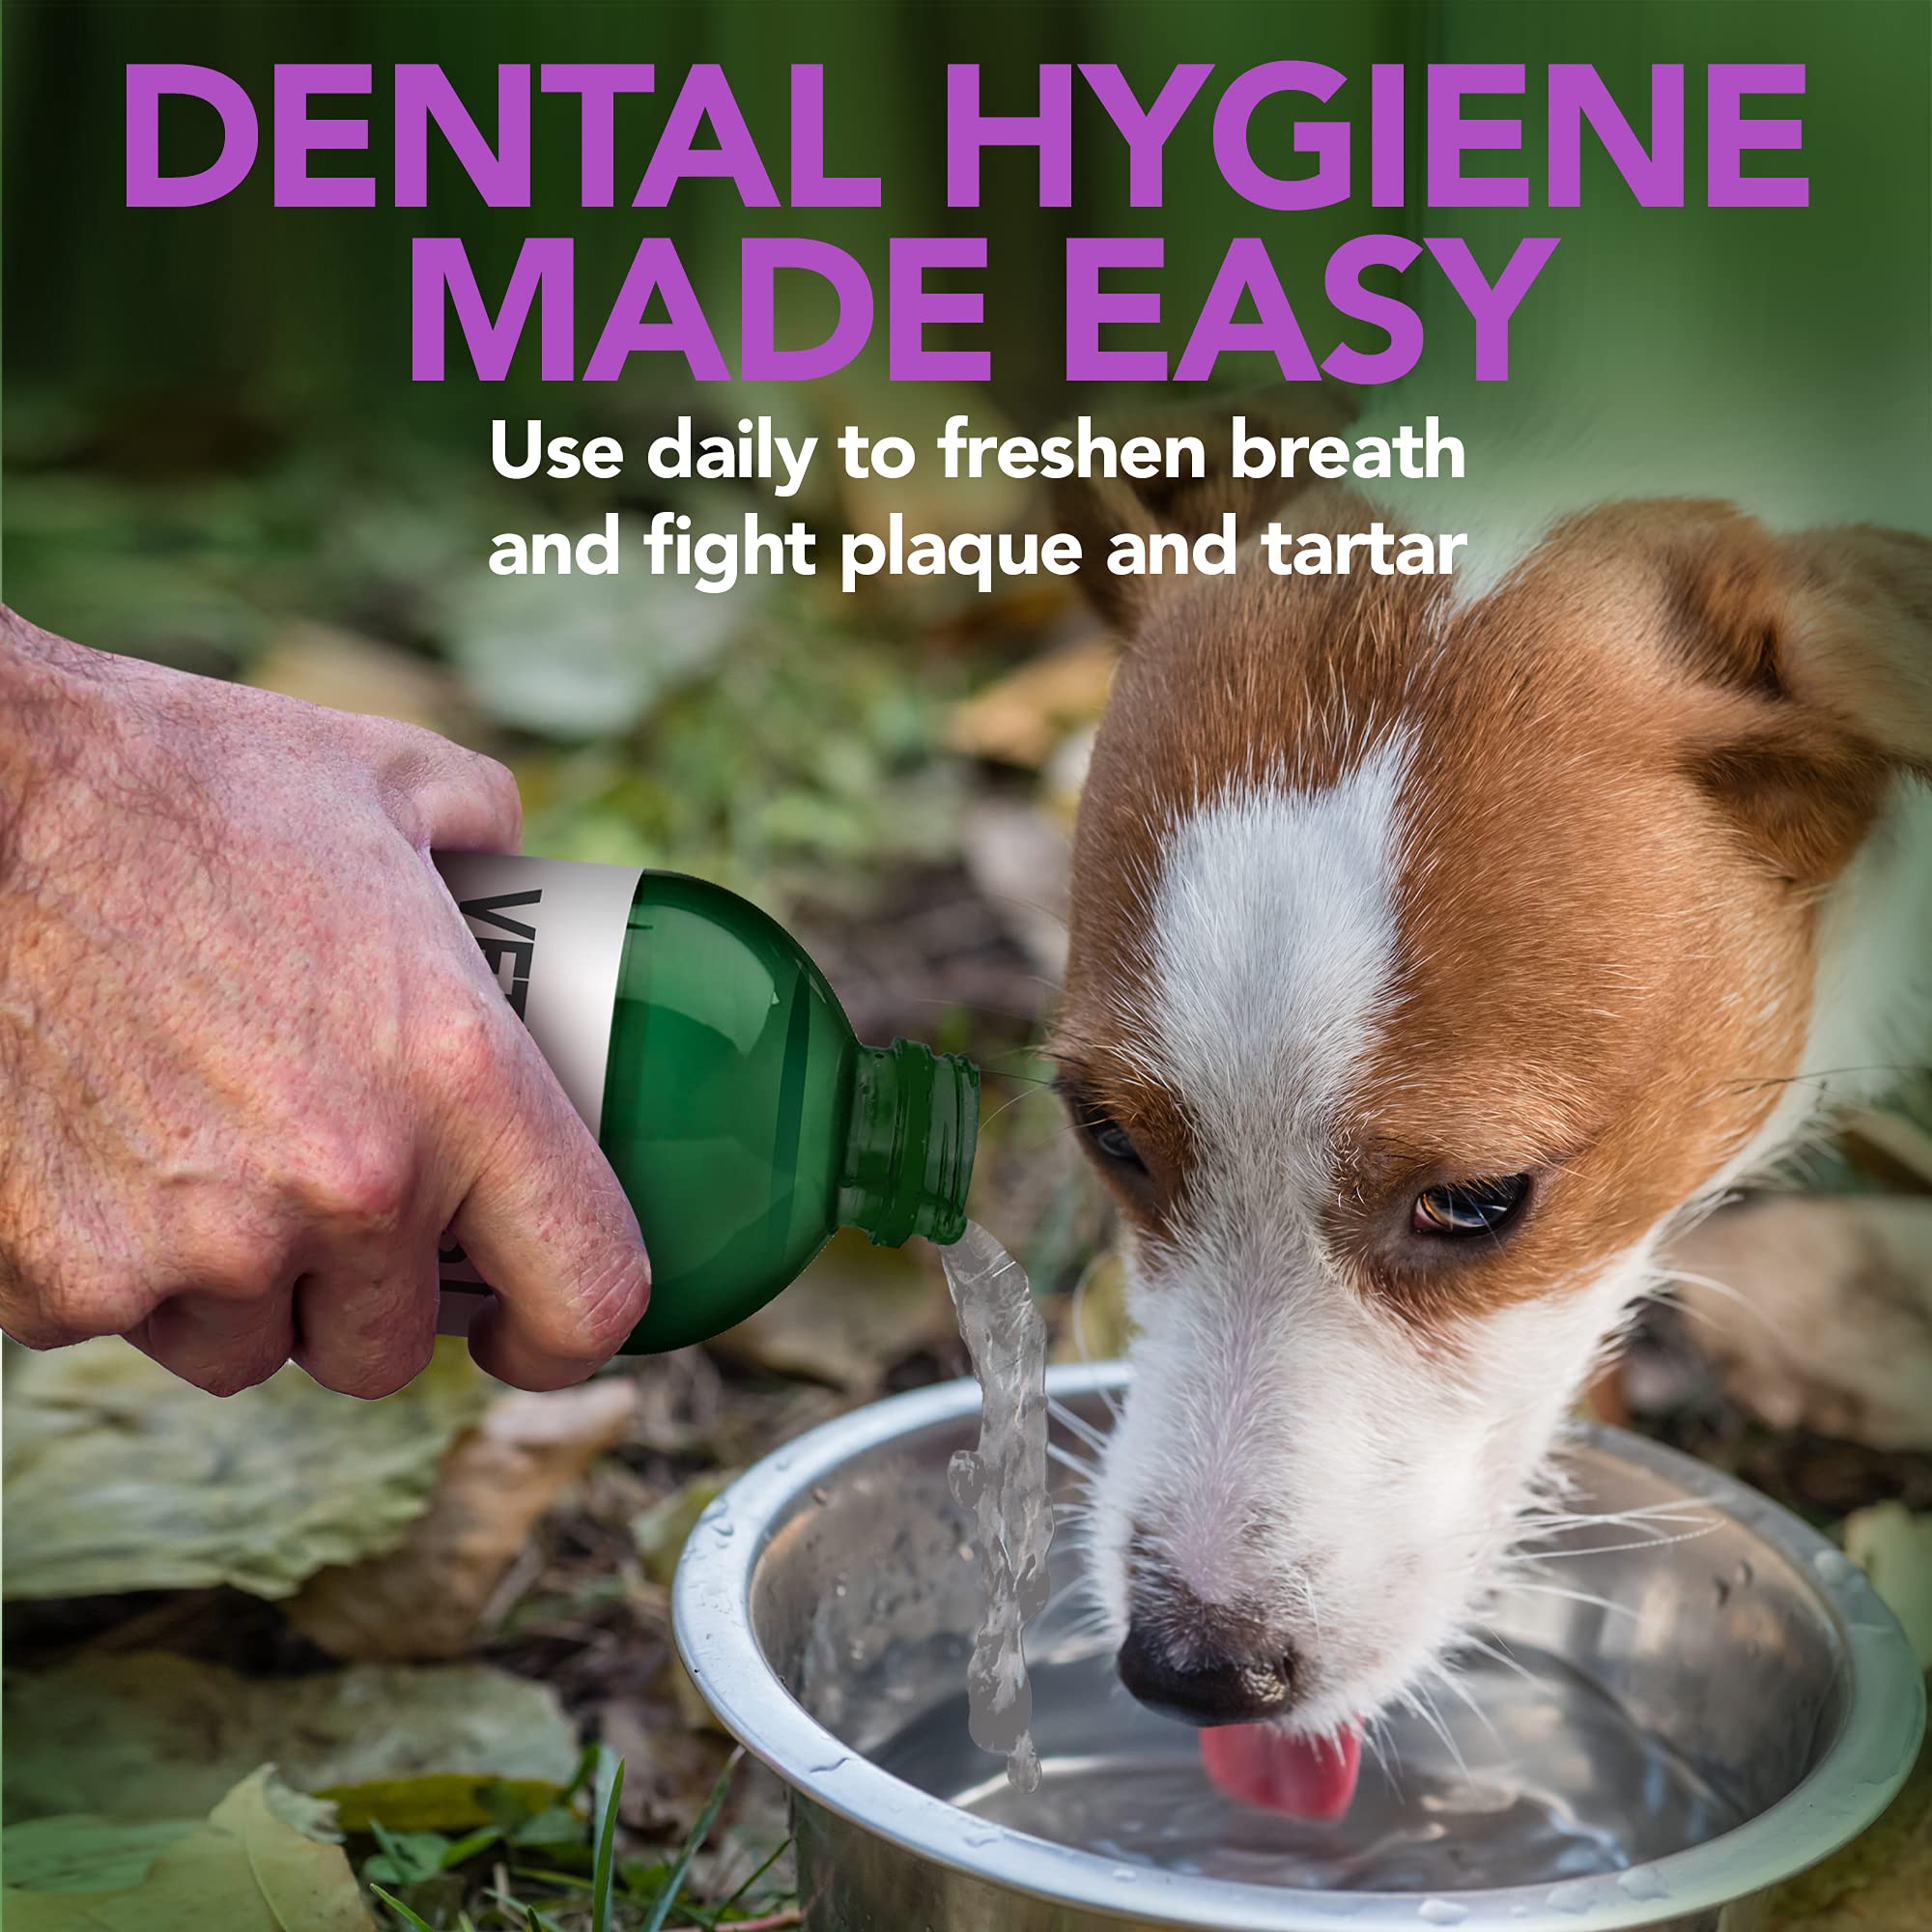 Breath Freshener | Water Additive For Dogs